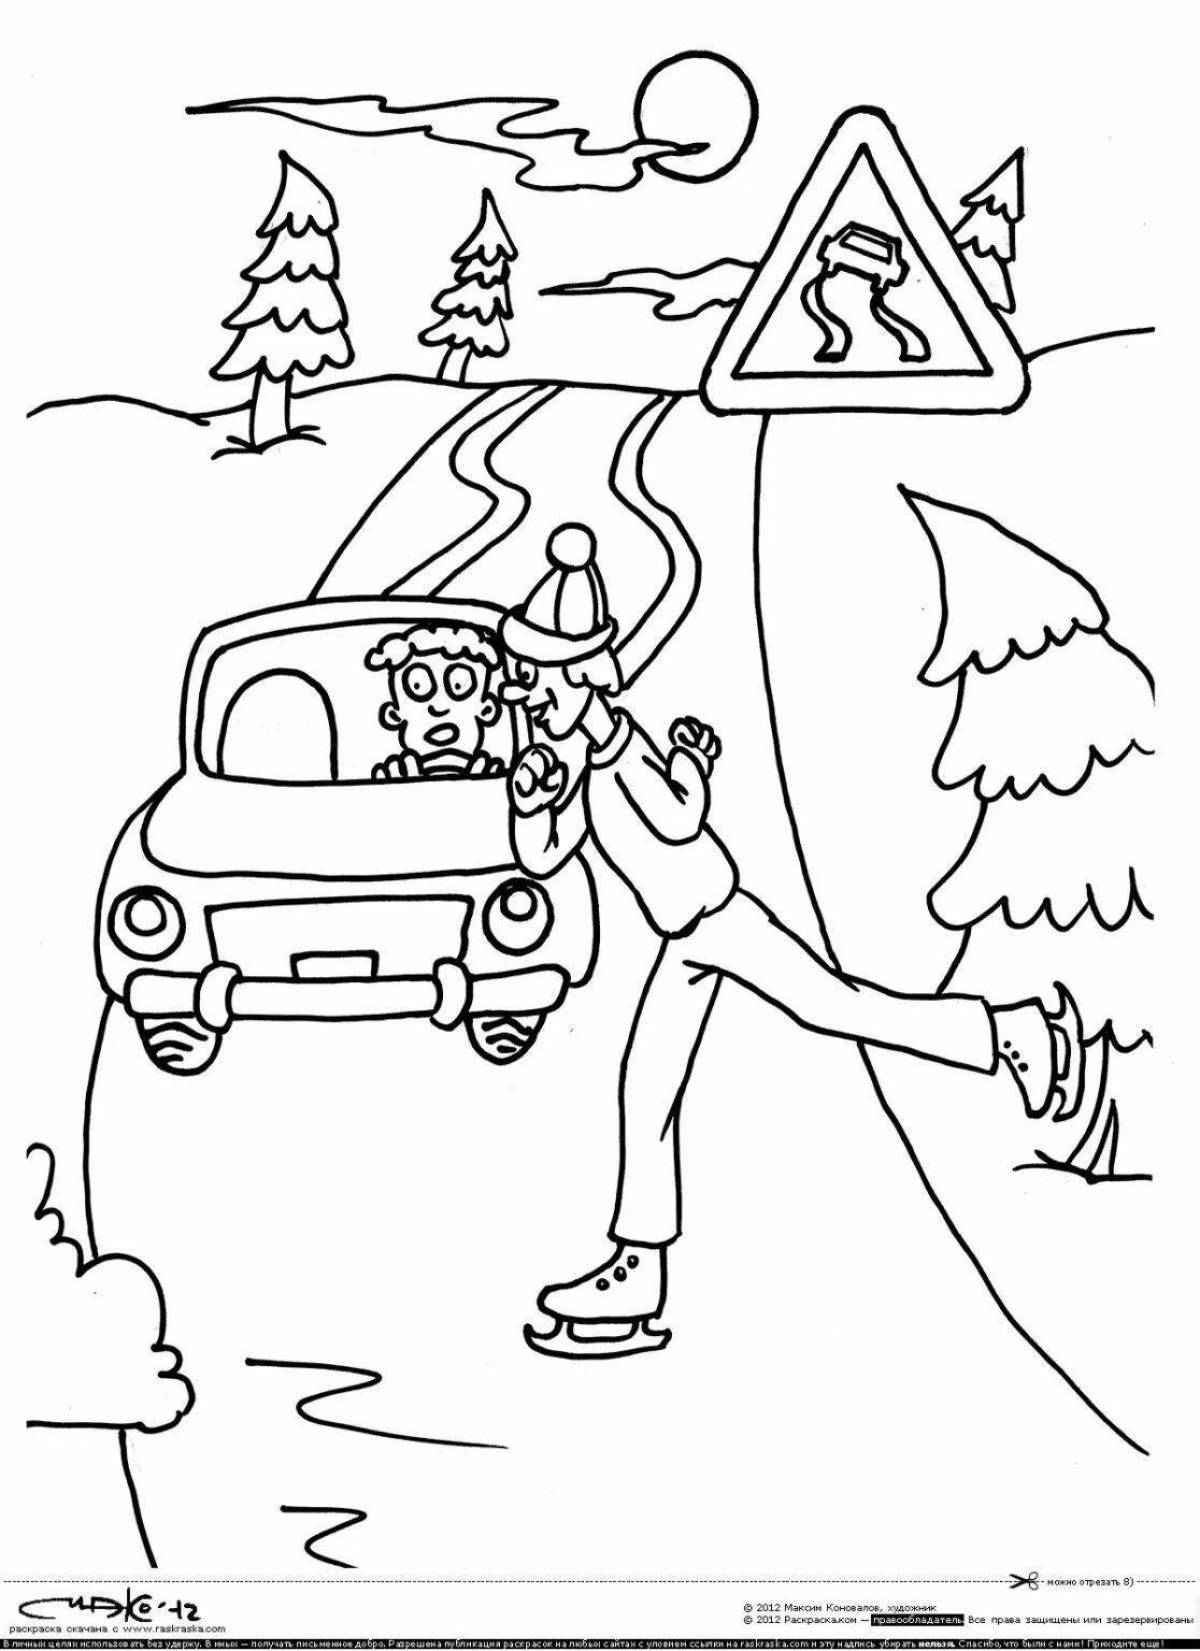 Colourful winter safety coloring book for preschoolers